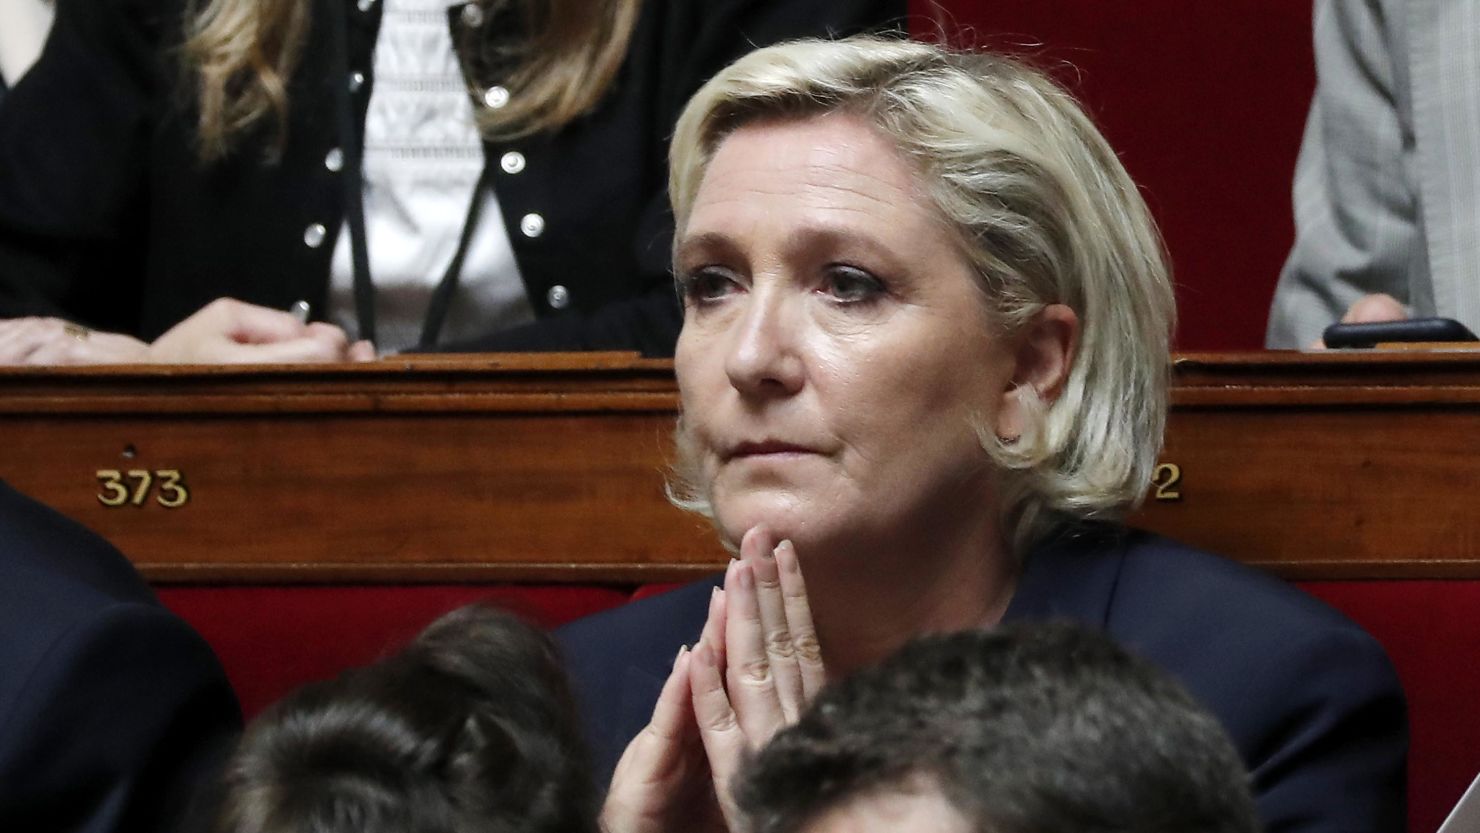 National Front leader Marine Le Pen attends a session of the new French Parliament this week in Paris.